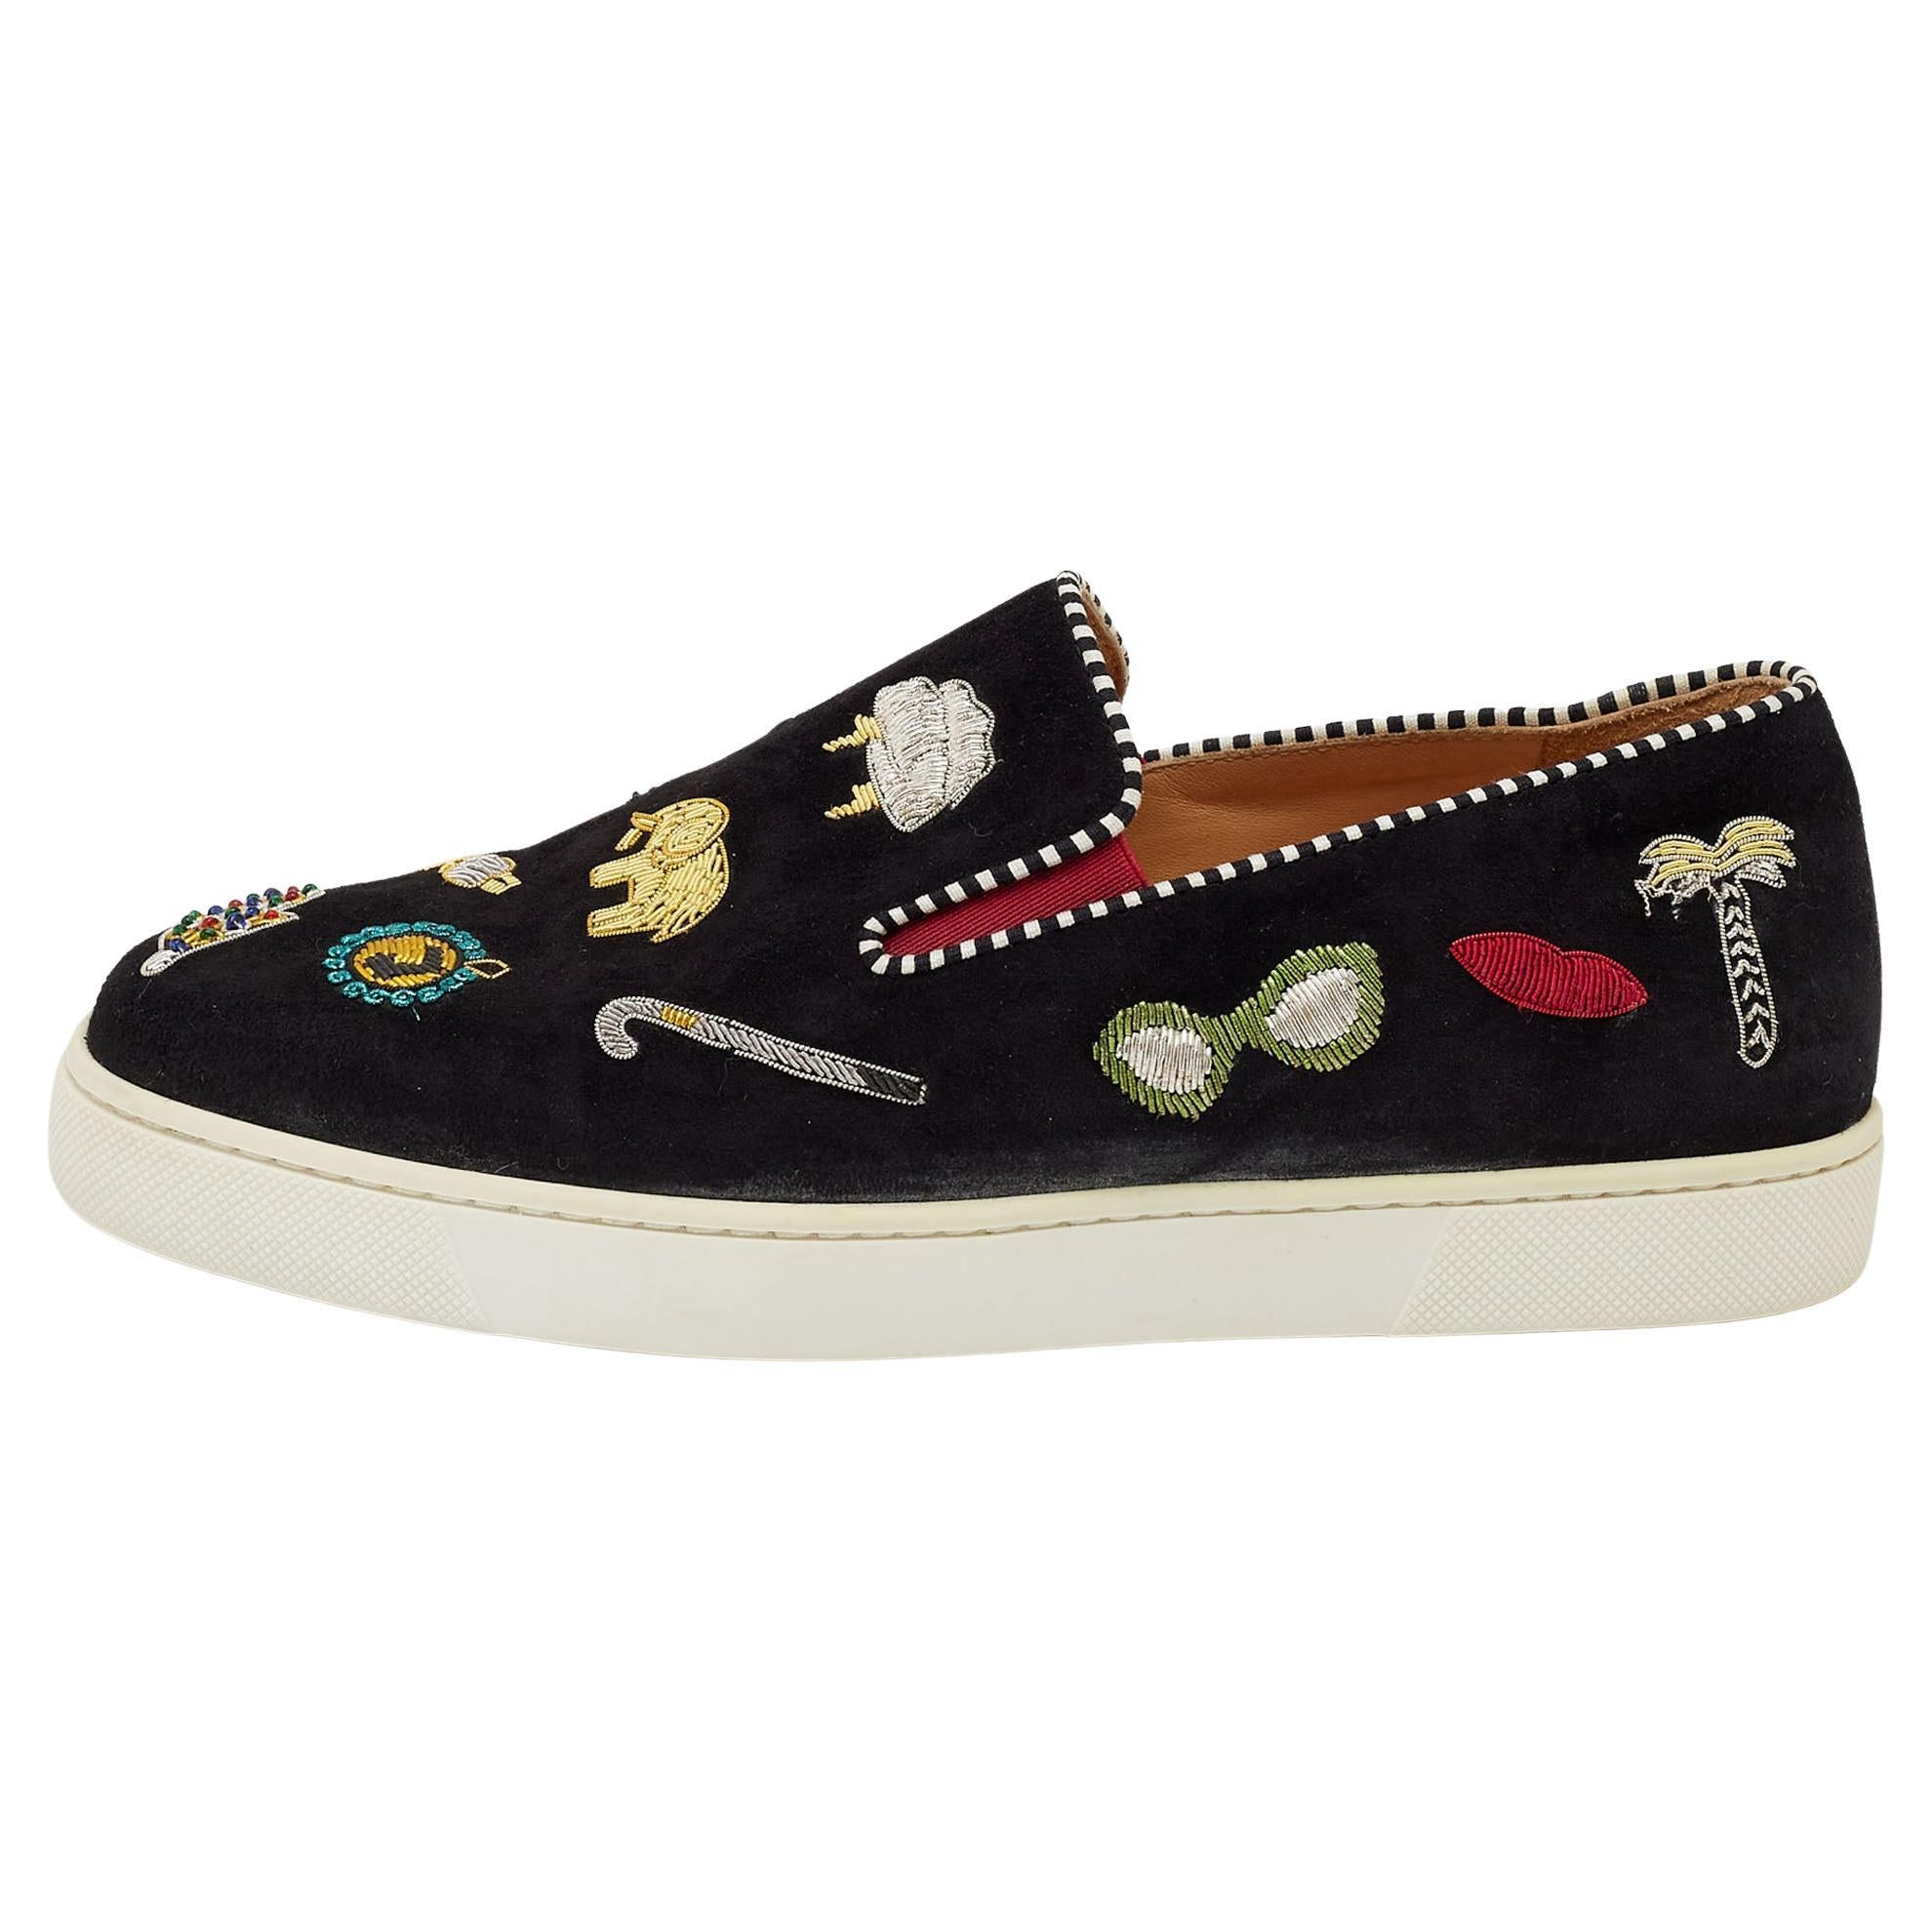 Christian Louboutin Black Suede Embellished Pik N Luck Slip-on Sneakers Size 37